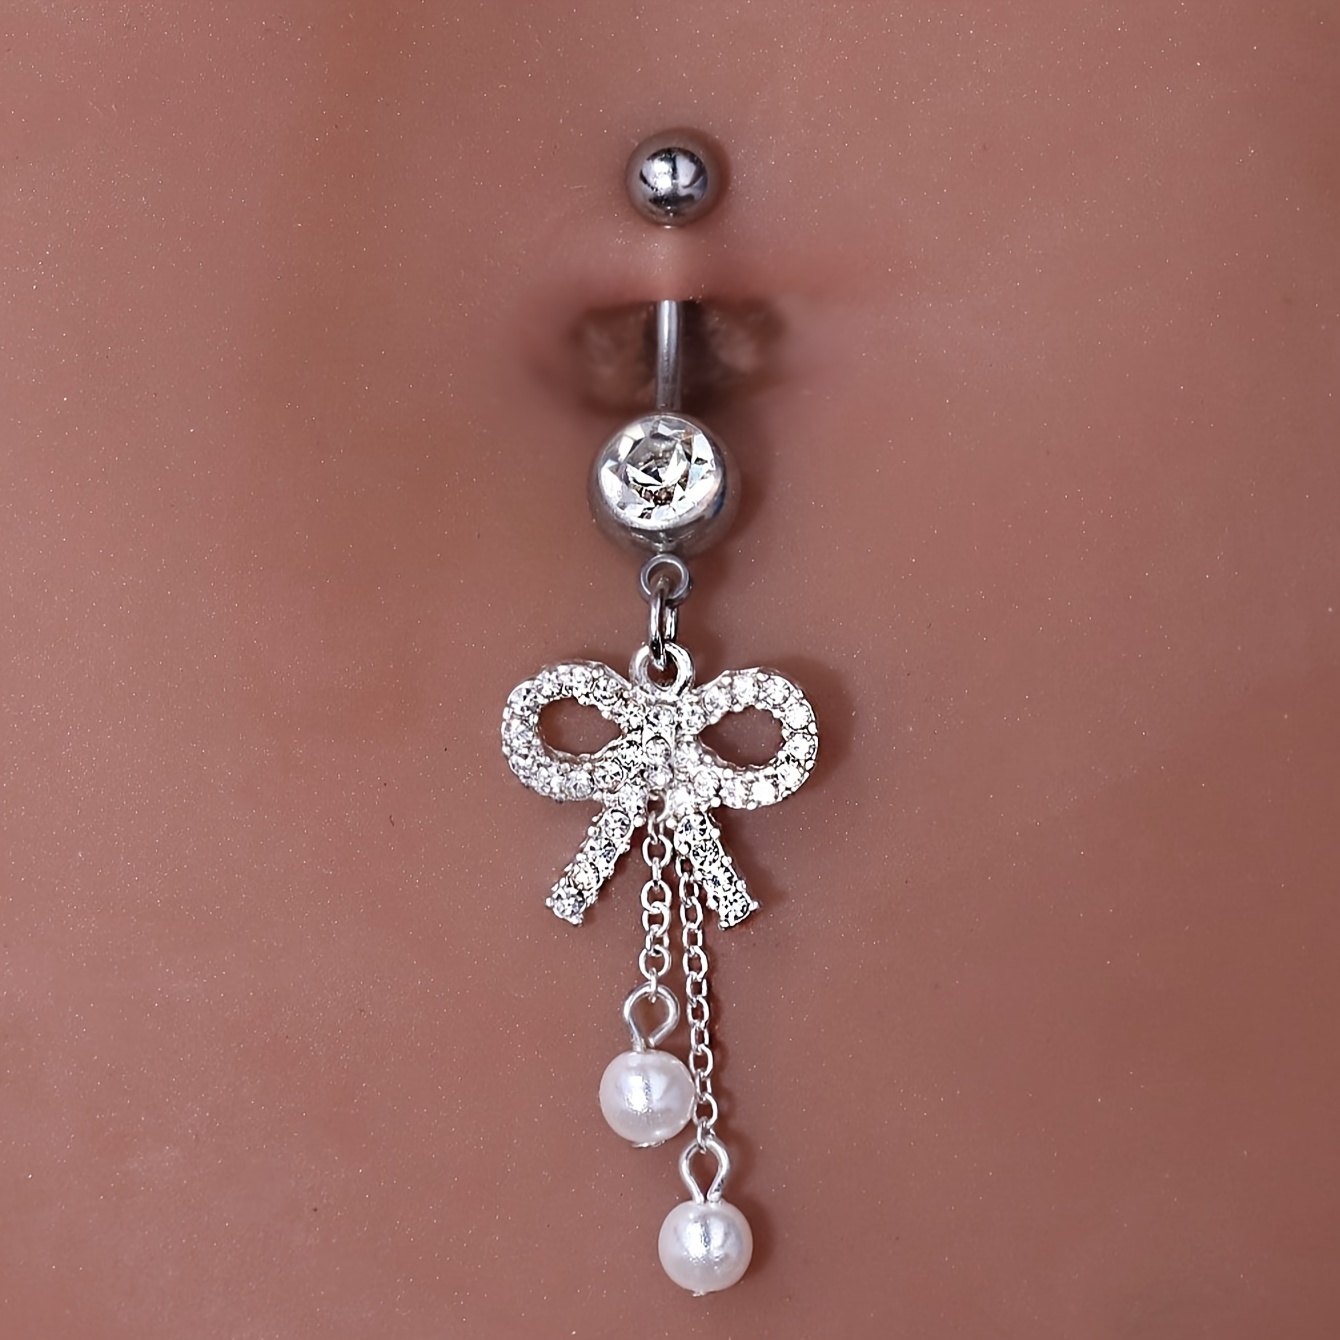 

Sparkling Bowknot Love Heart Shaped Faux Pearl Belly Button Ring, Stainless Steel Dangle Belly Button Ring Body Piercing Jewelry